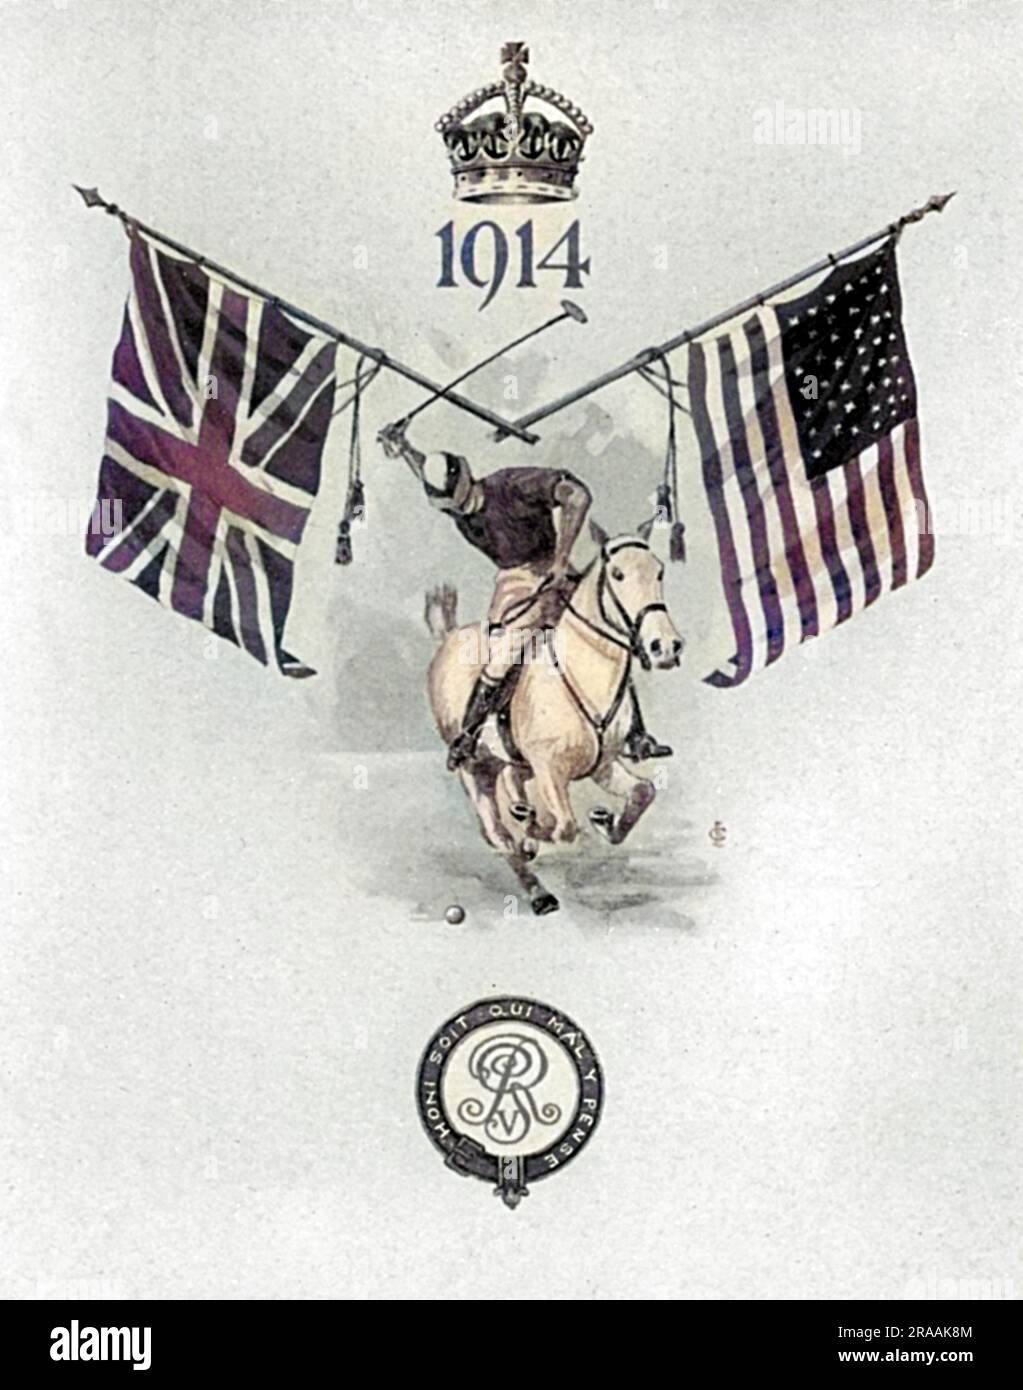 The menu card at the dinner given by King George V at Buckingham Palace to the England polo team after they had won the International Polo Trophy - or Westchester Cup - from America in 1914.     Date: 1914 Stock Photo